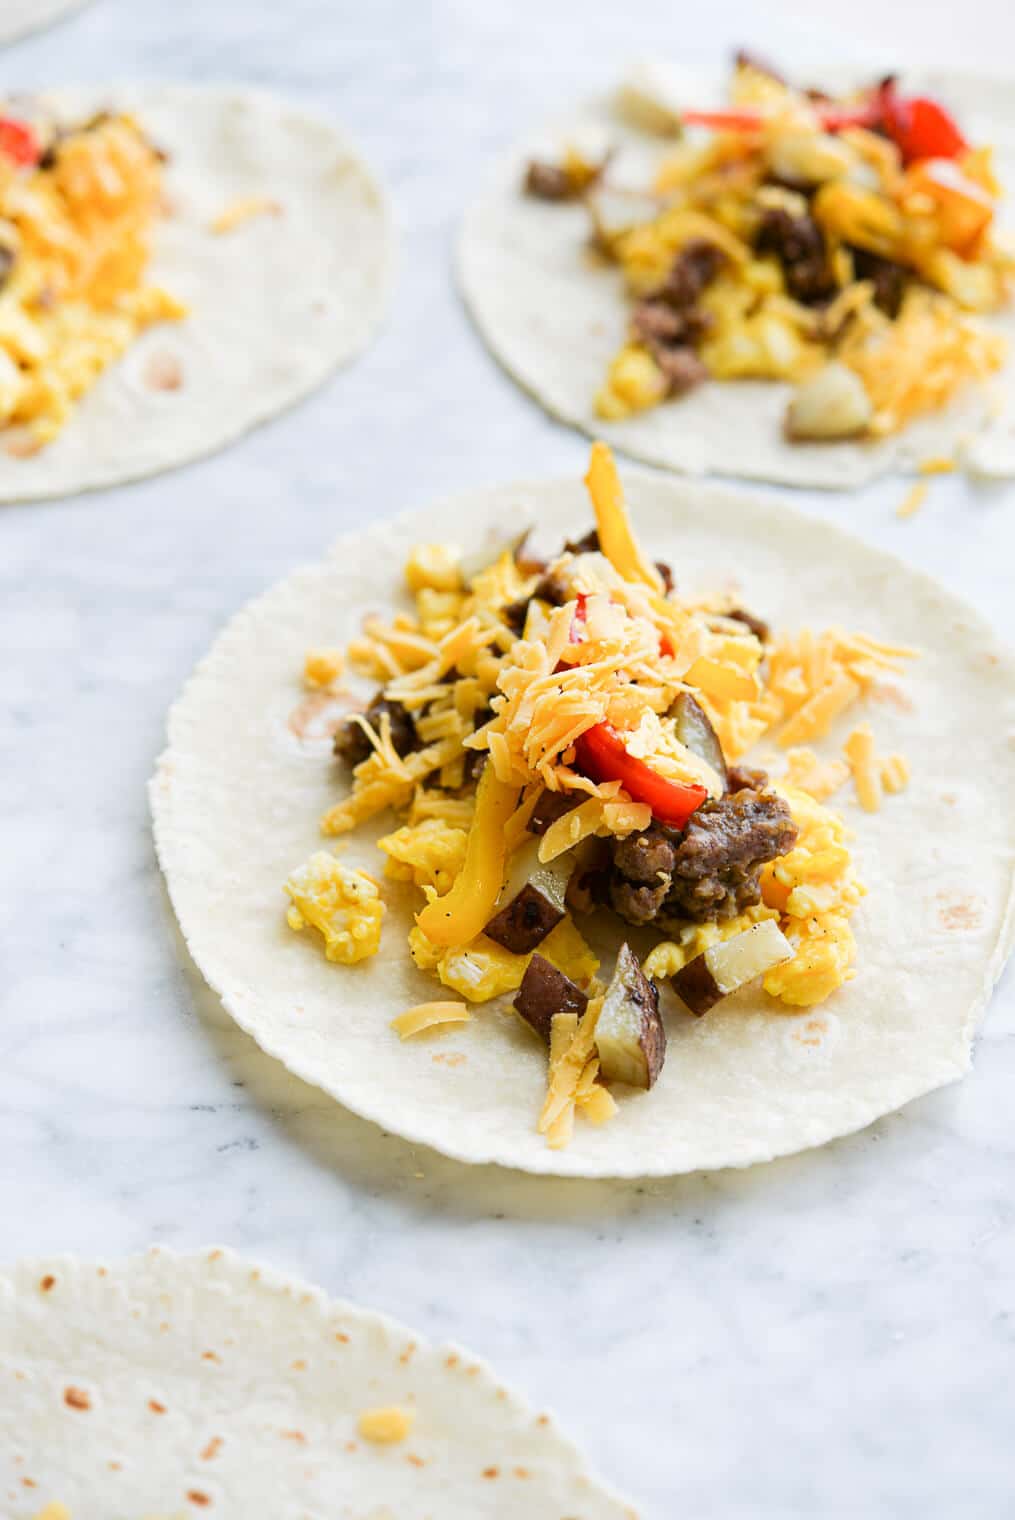 side view of open breakfast tacos filled with scrambled eggs, potatoes, bell peppers, shredded cheese, and crumbed breakfast sausage laying on a marble surface